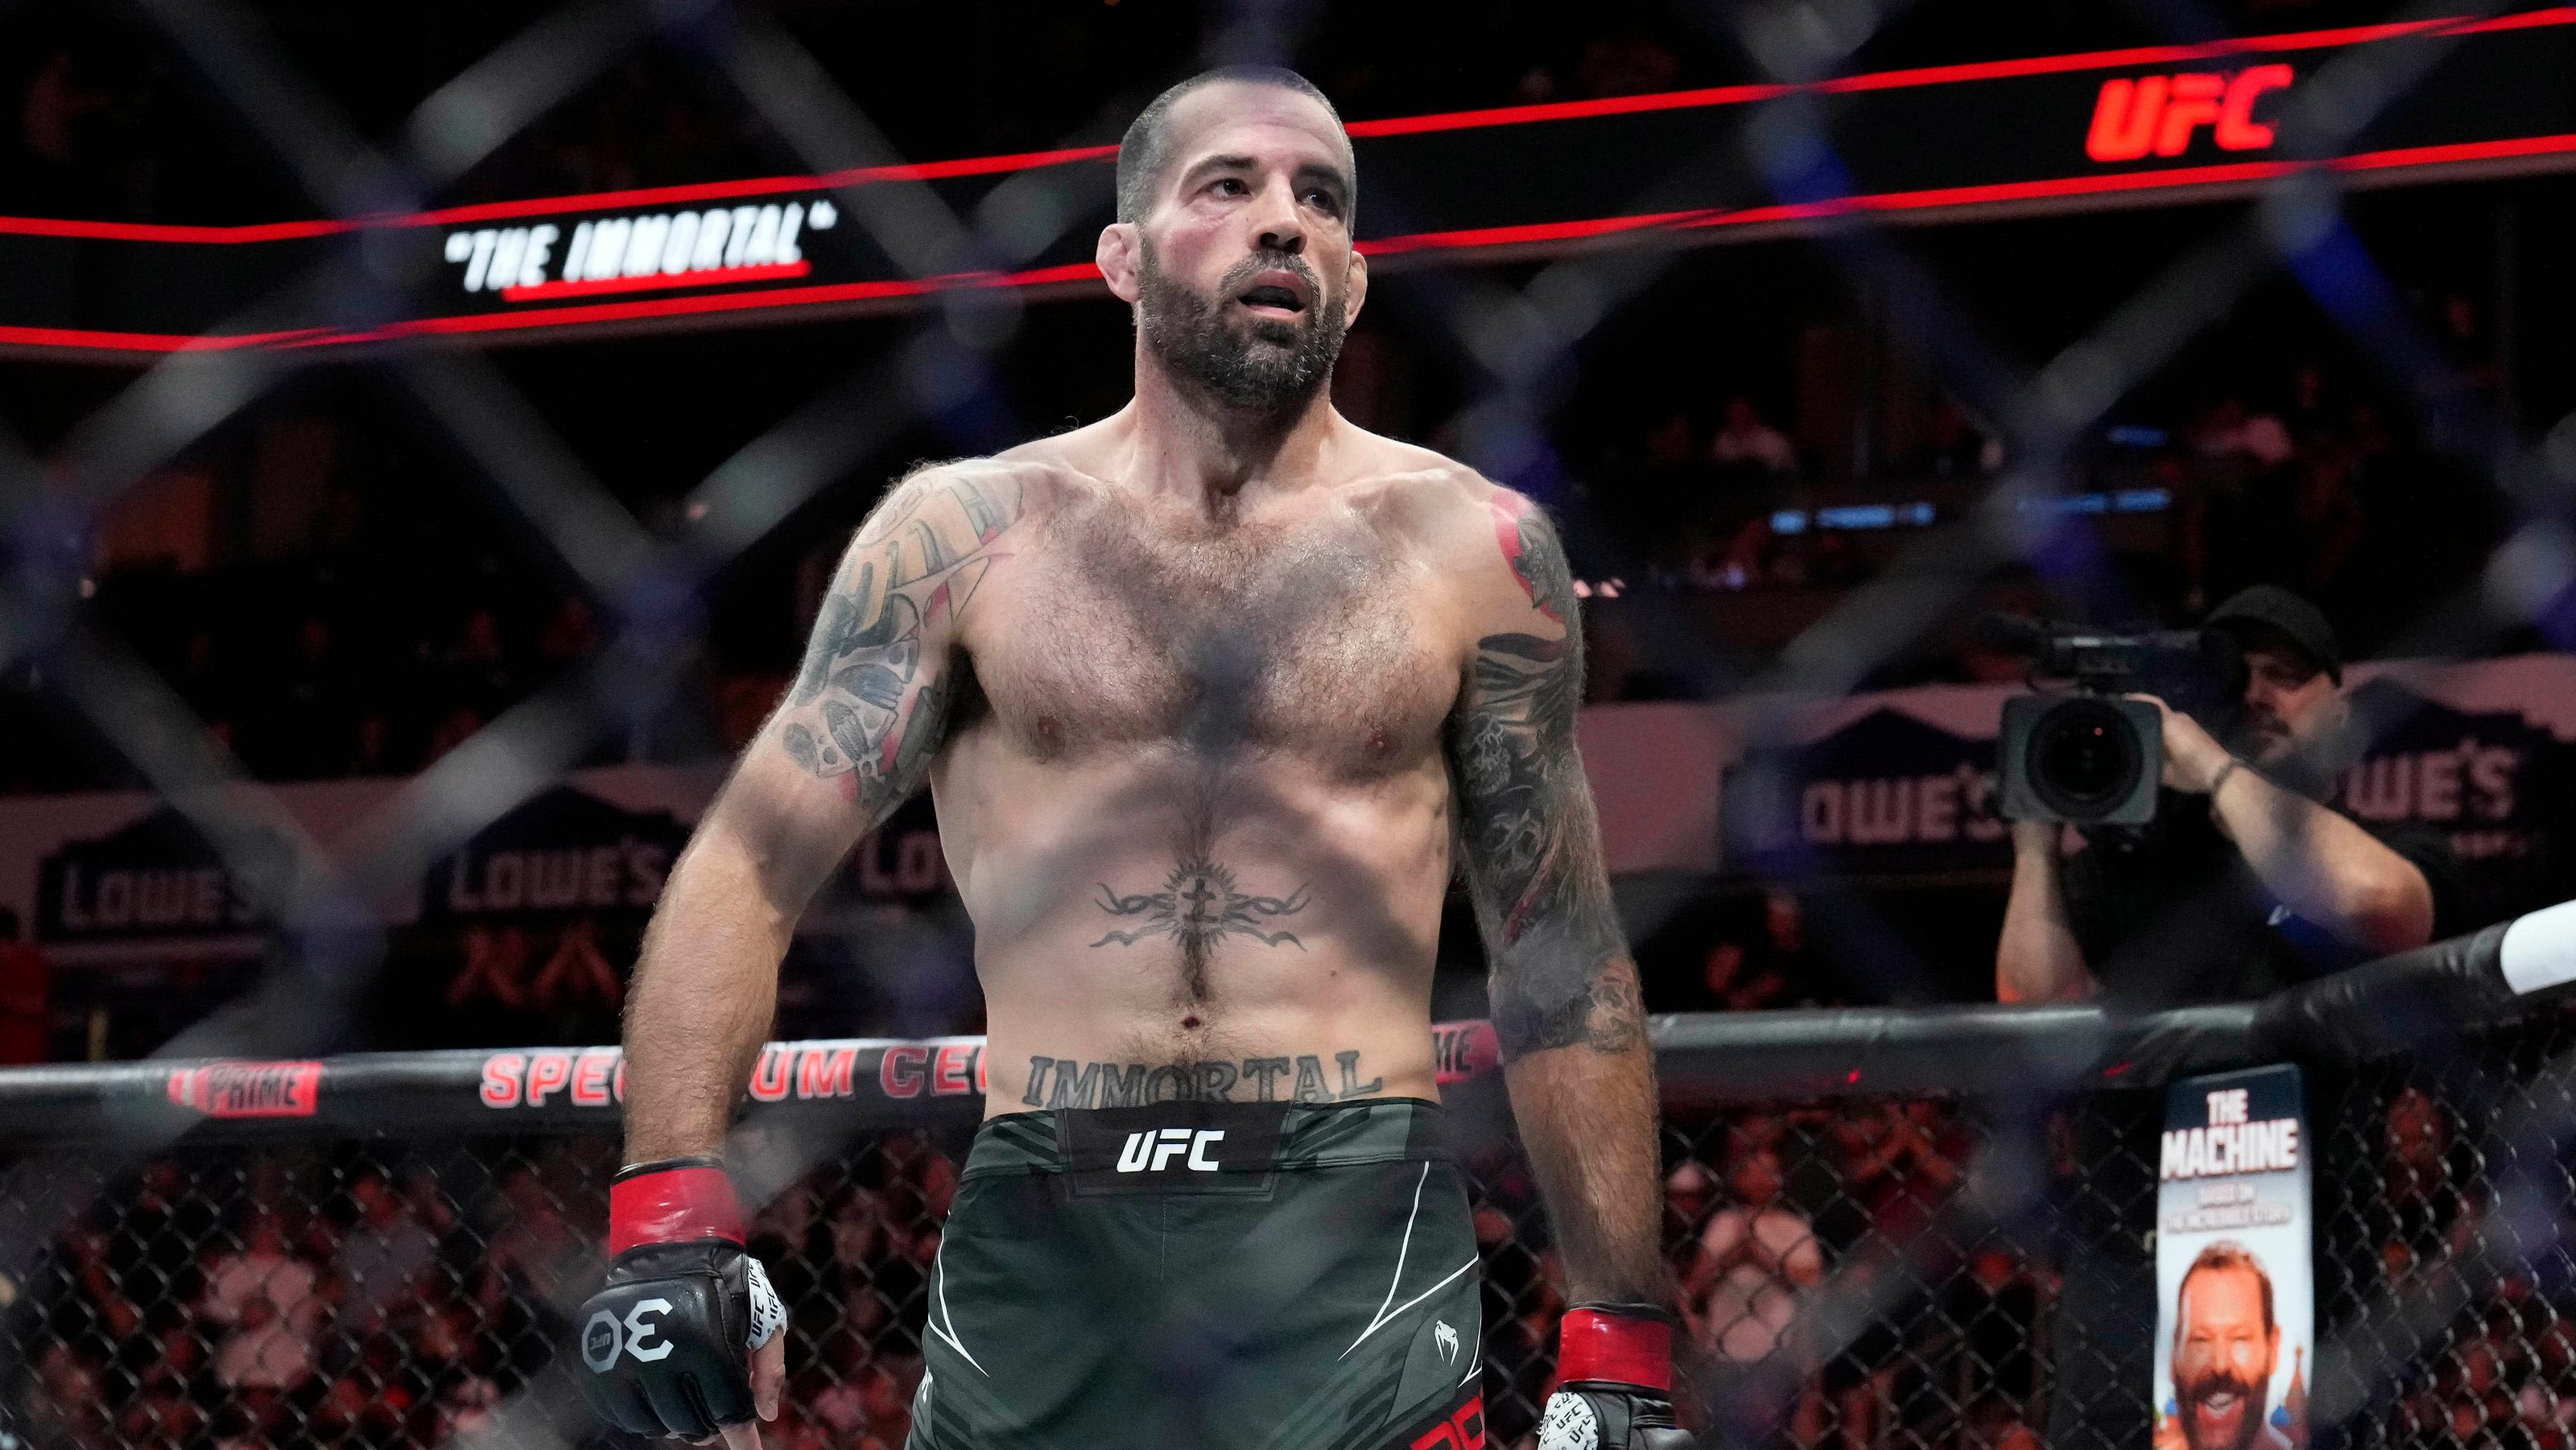 Matt Brown, who has the second-most knockouts in UFC history, calls it a career